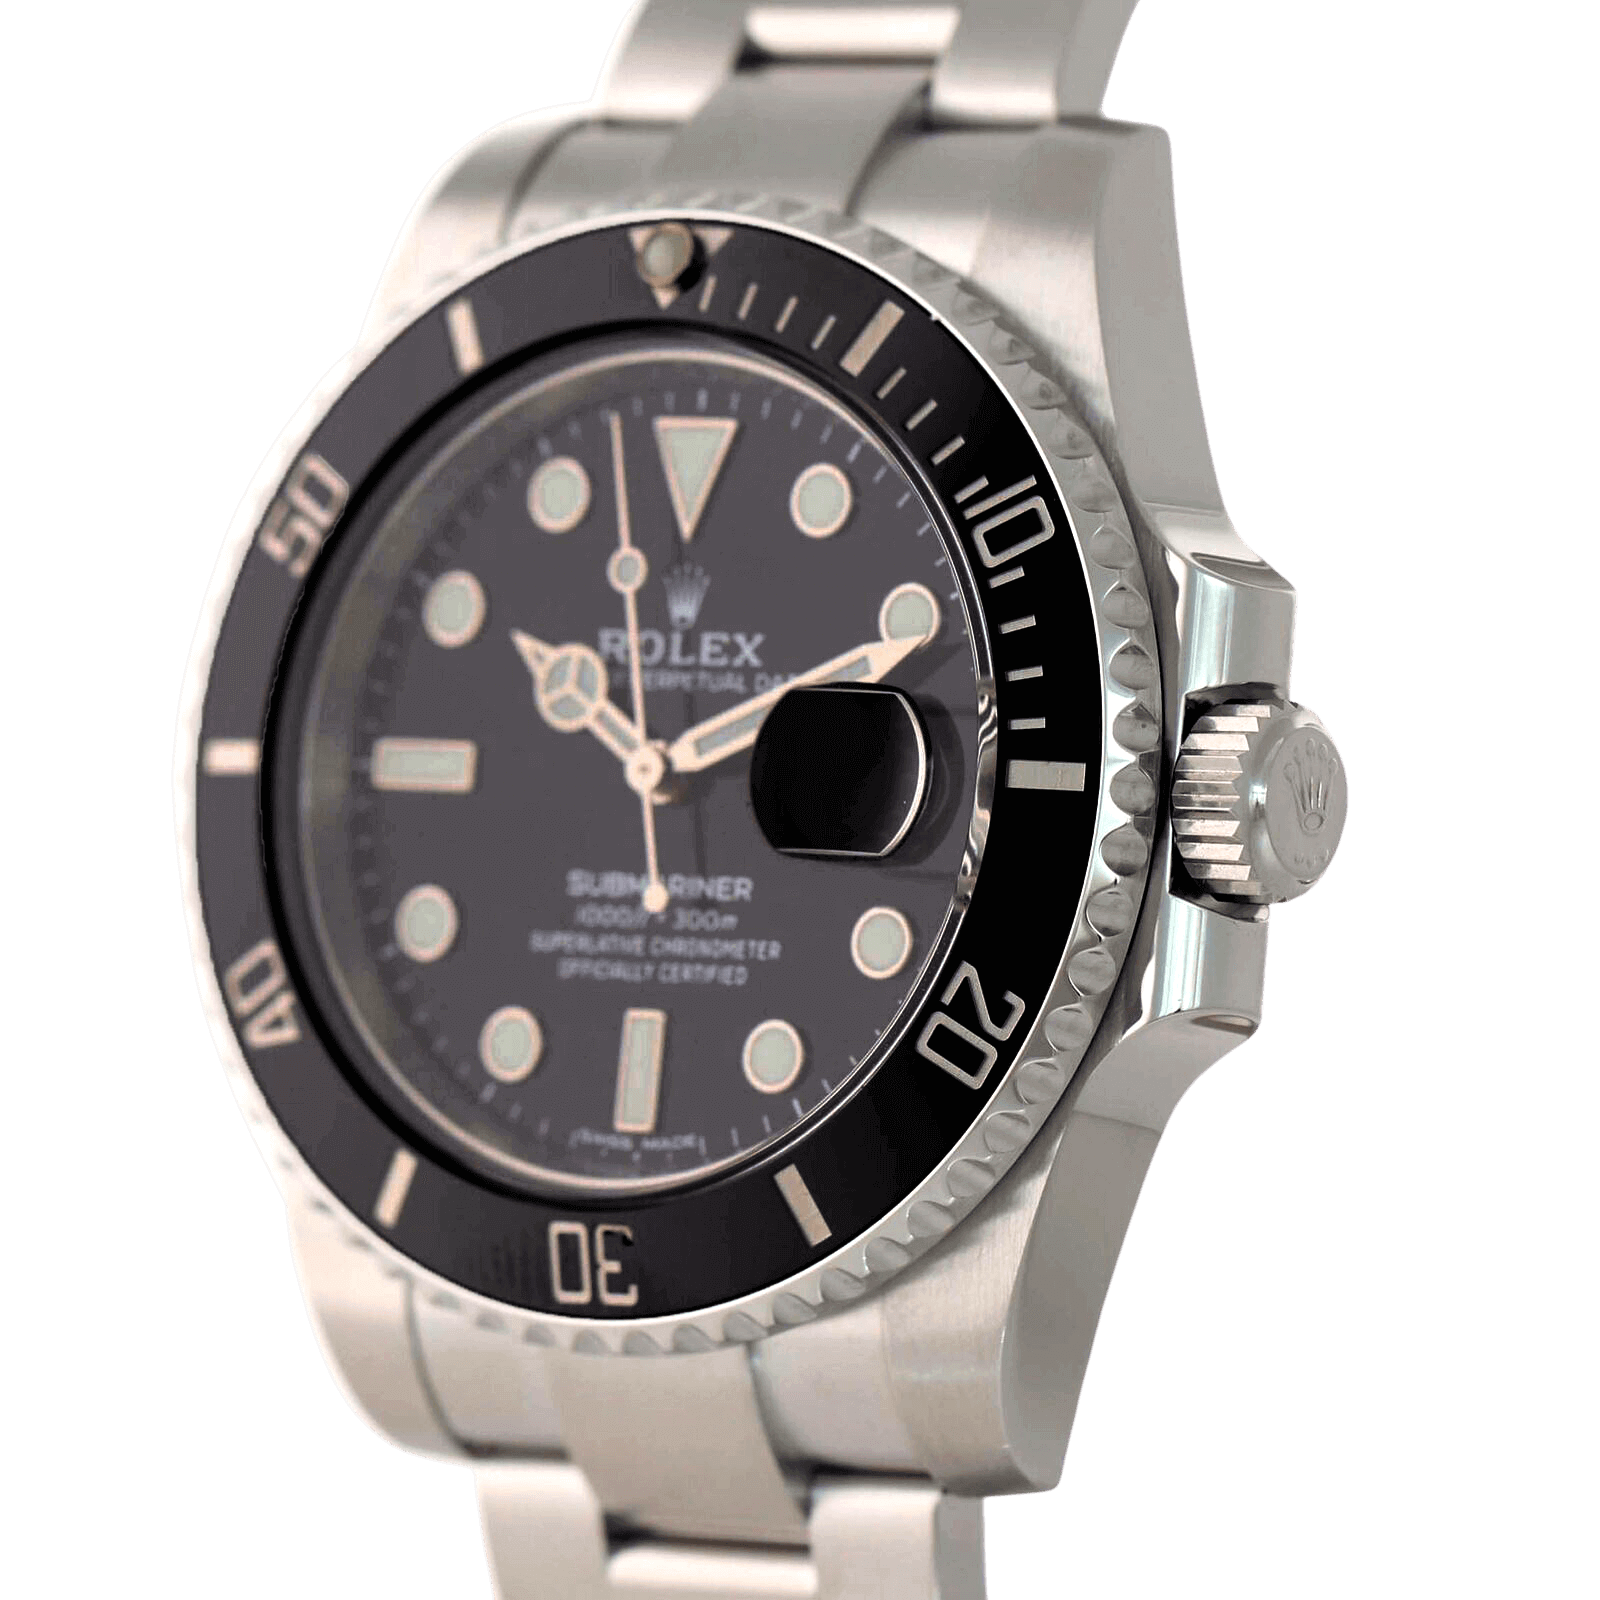 Rolex Submariner Watches for Sale Authenticity Guaranteed eBay